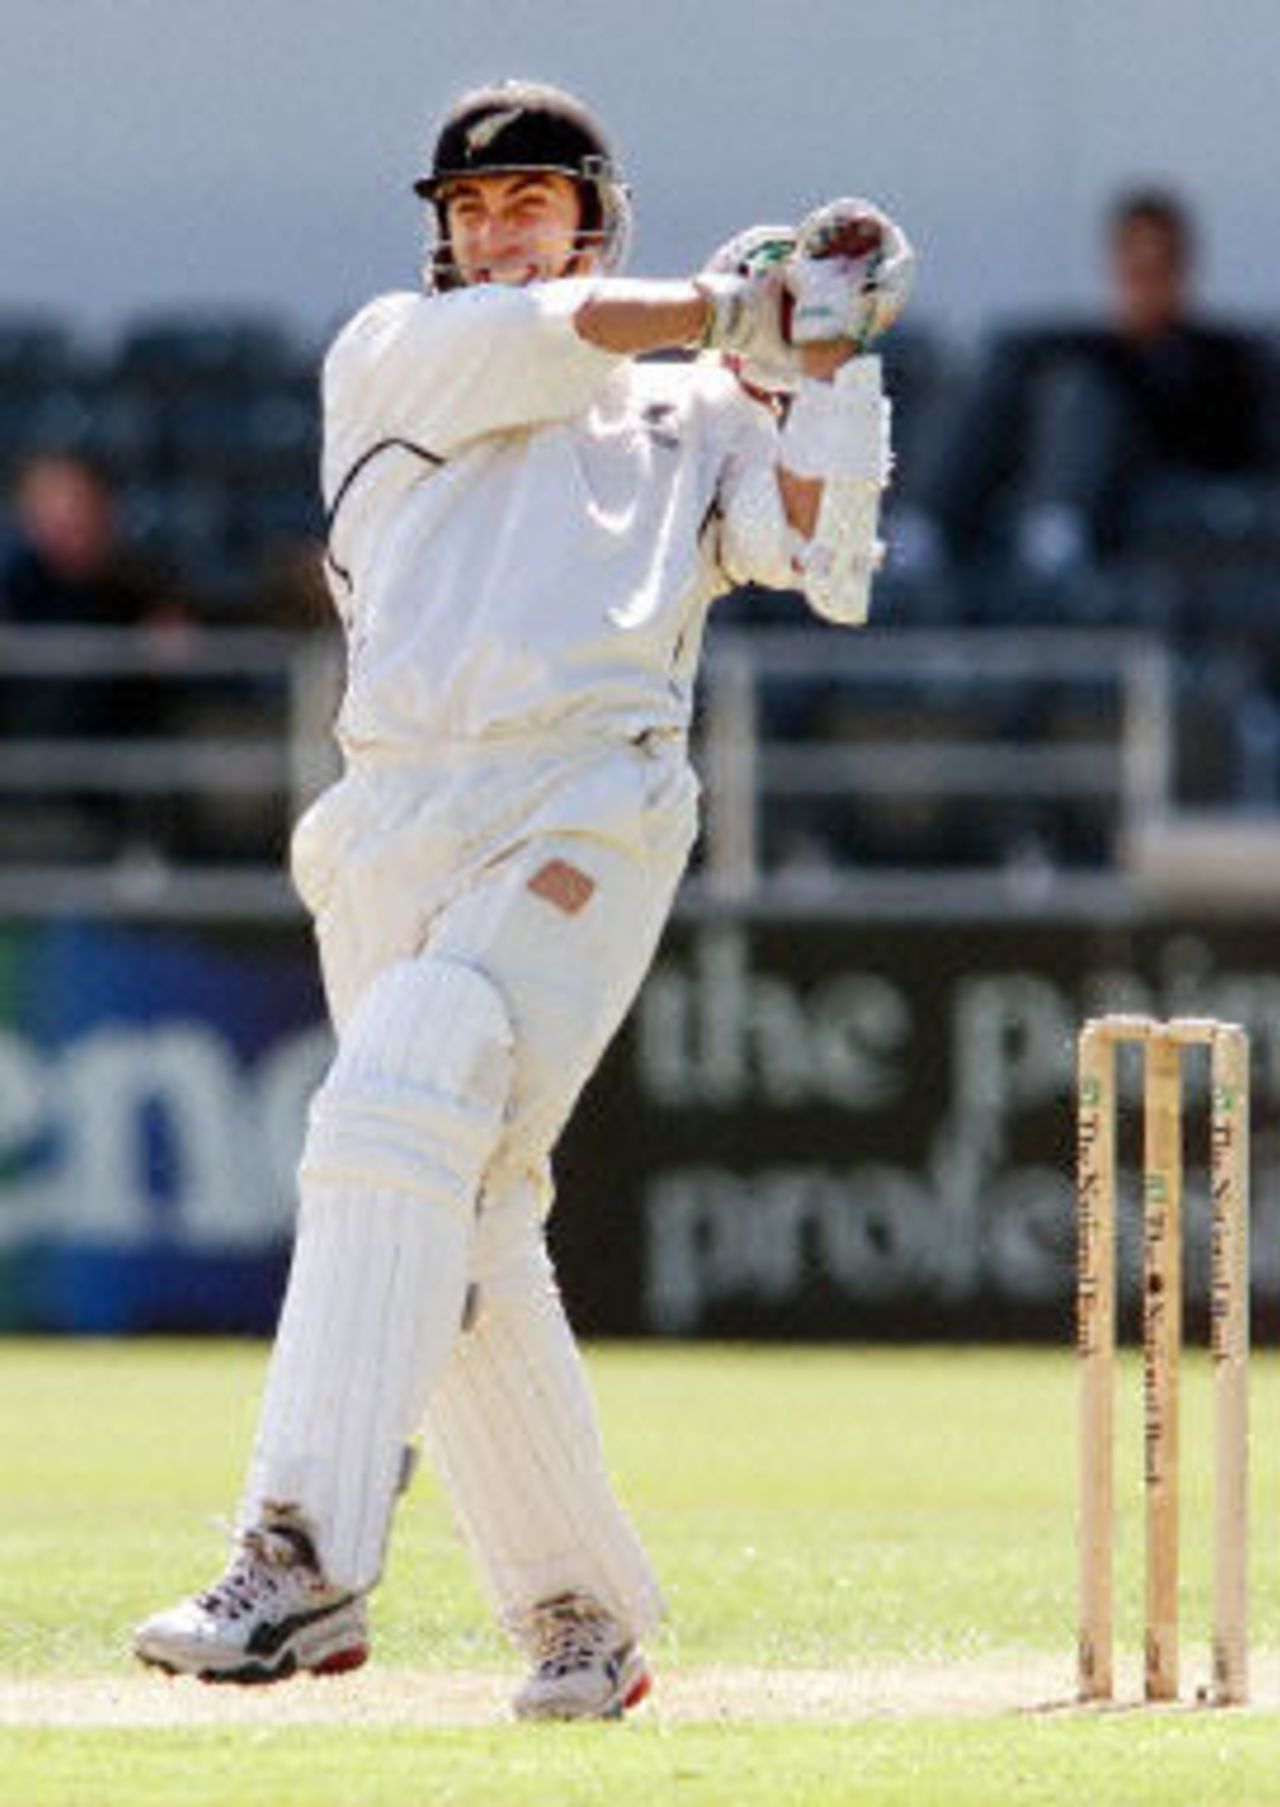 Mathew Sinclair pulls a ball to the boundary on his way to scoring a double century, day 2, 2nd Test at Christchurch, 15-19 March 2001.